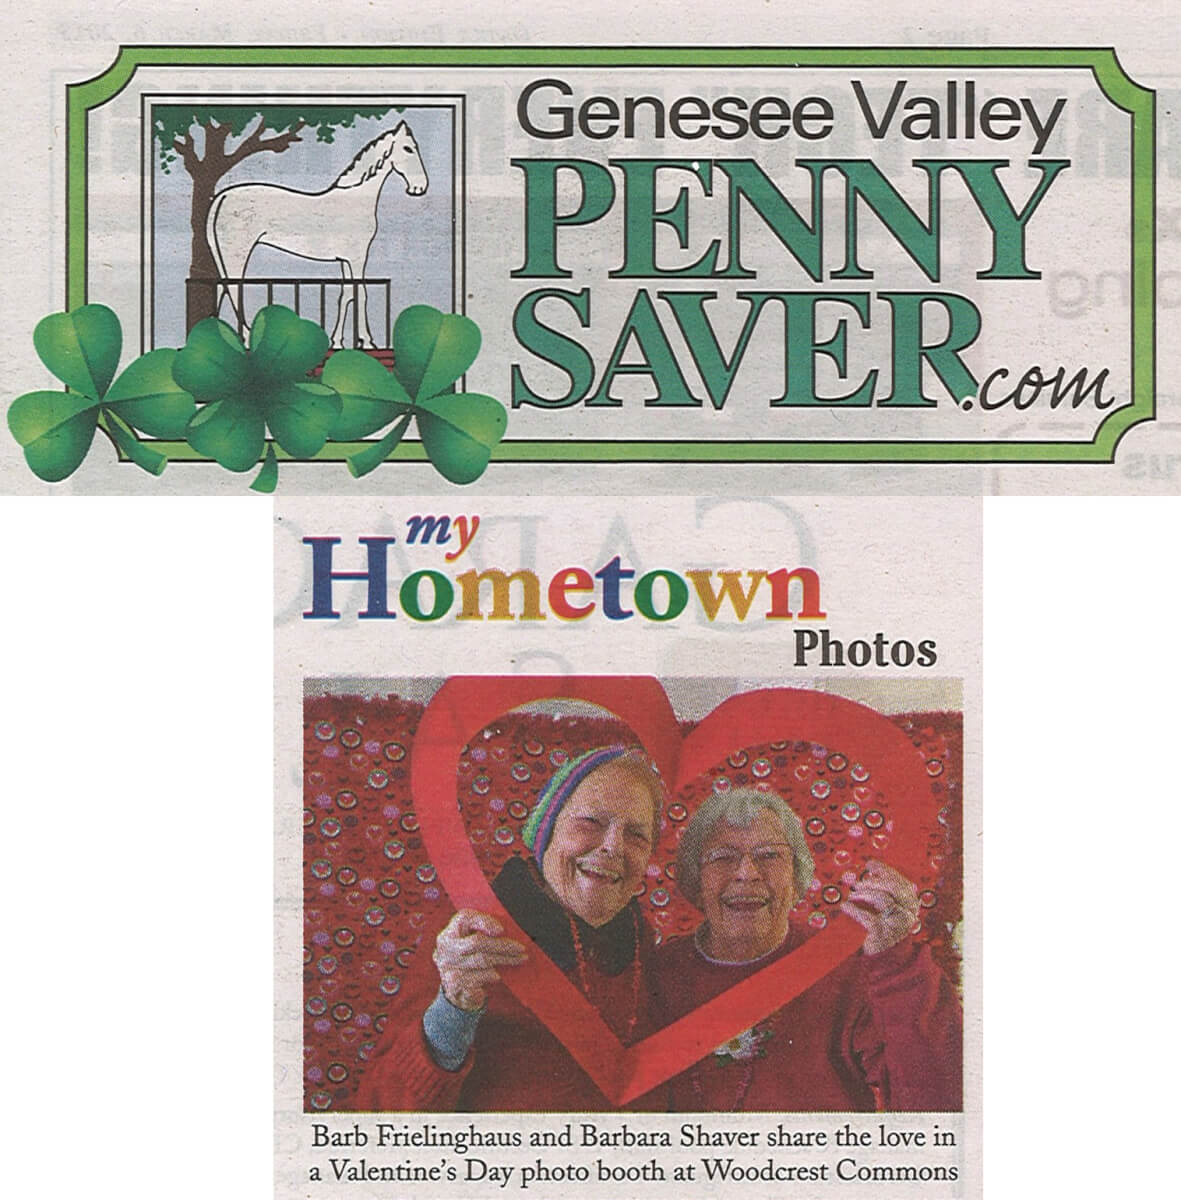 Woodcrest Commons Resident Valentine's Day photo in the Genesee Valley Penny Saver March 6, 2015